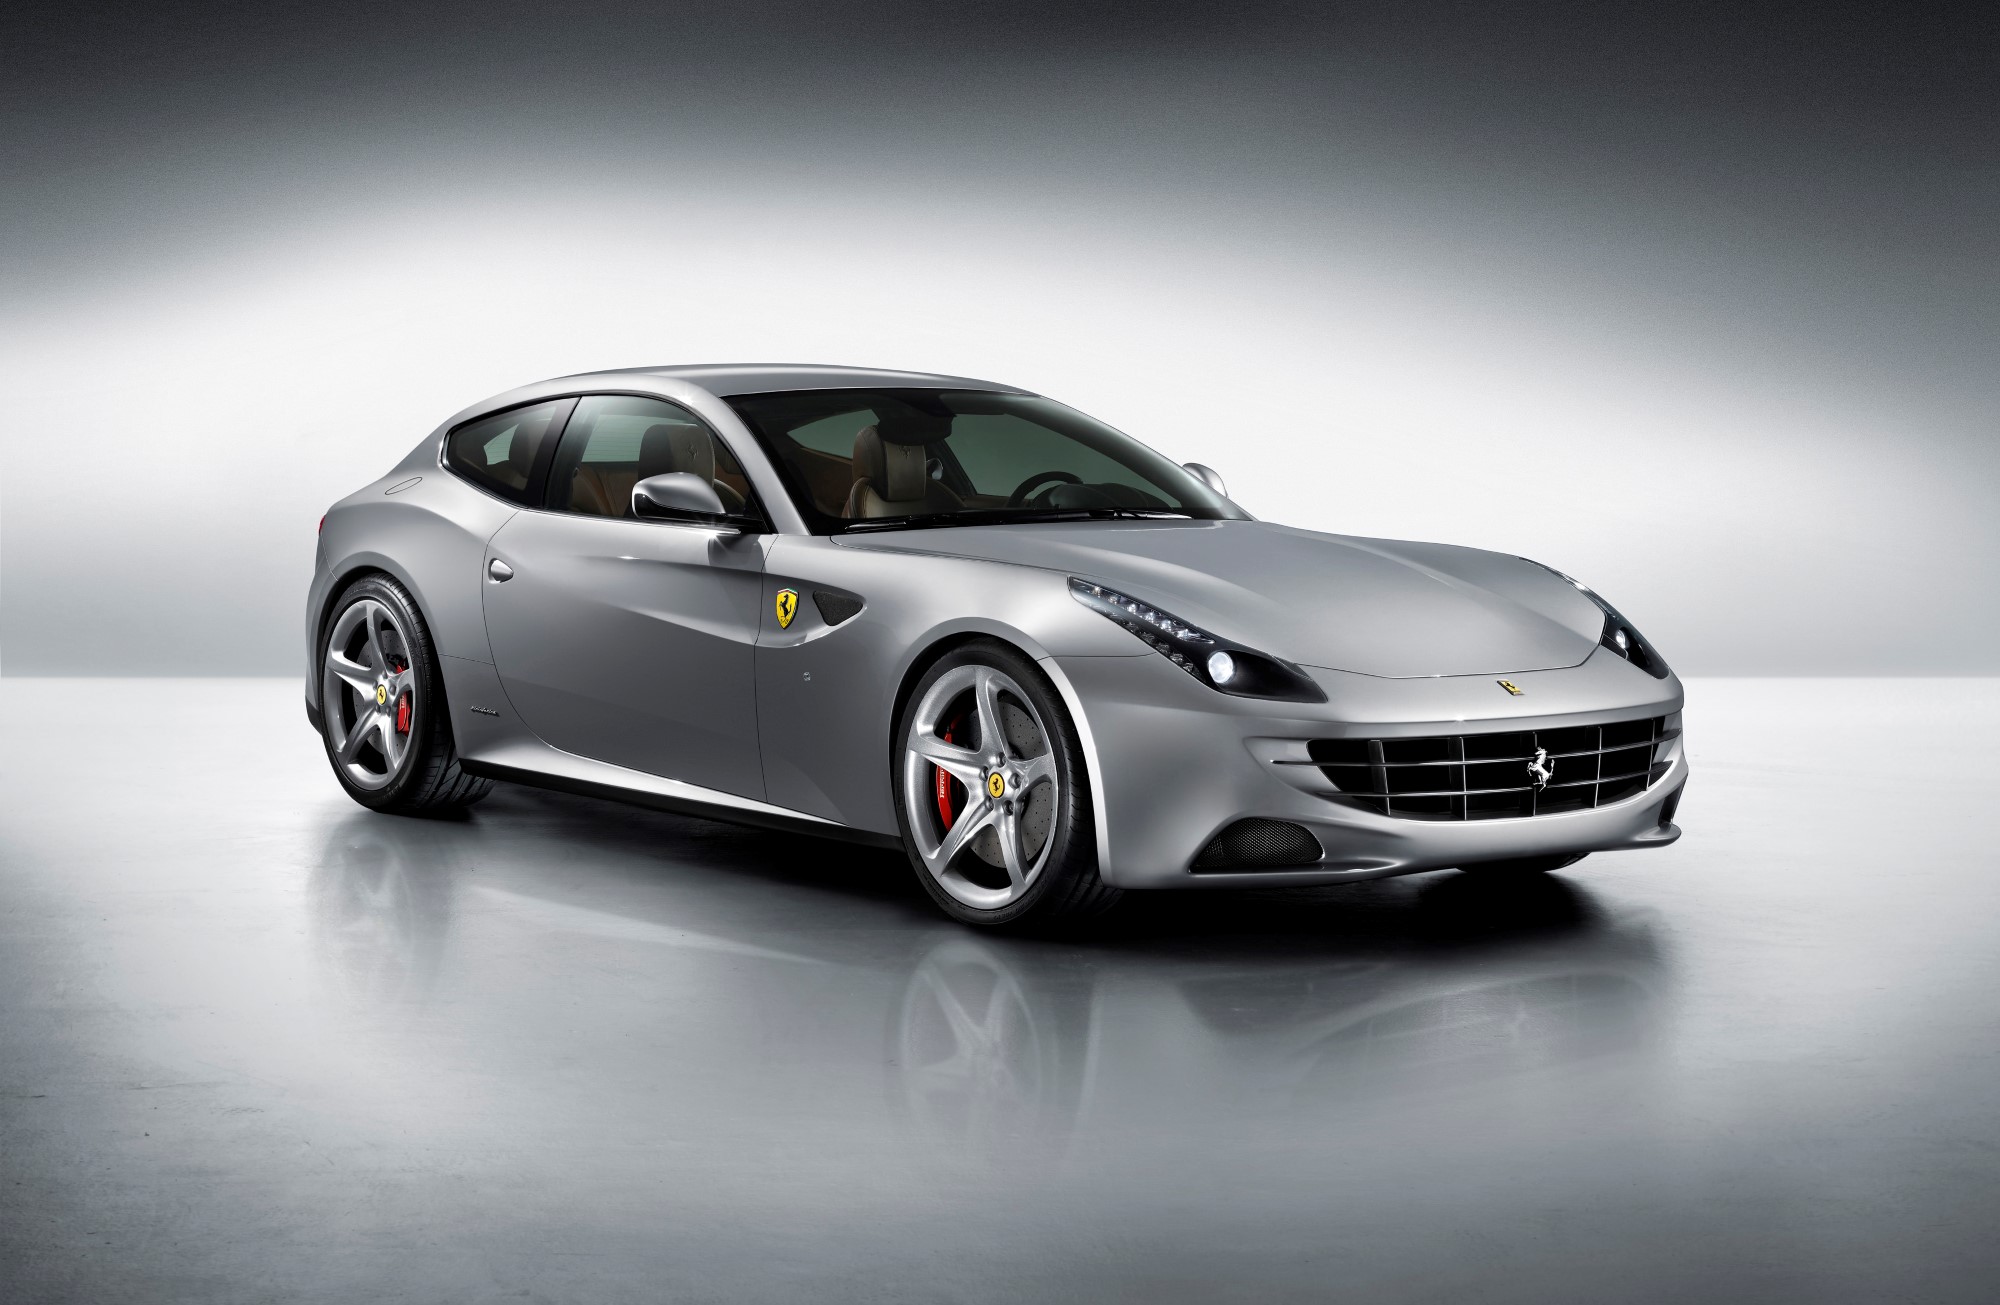 2014 Ferrari FF Summary Review - The Car Connection